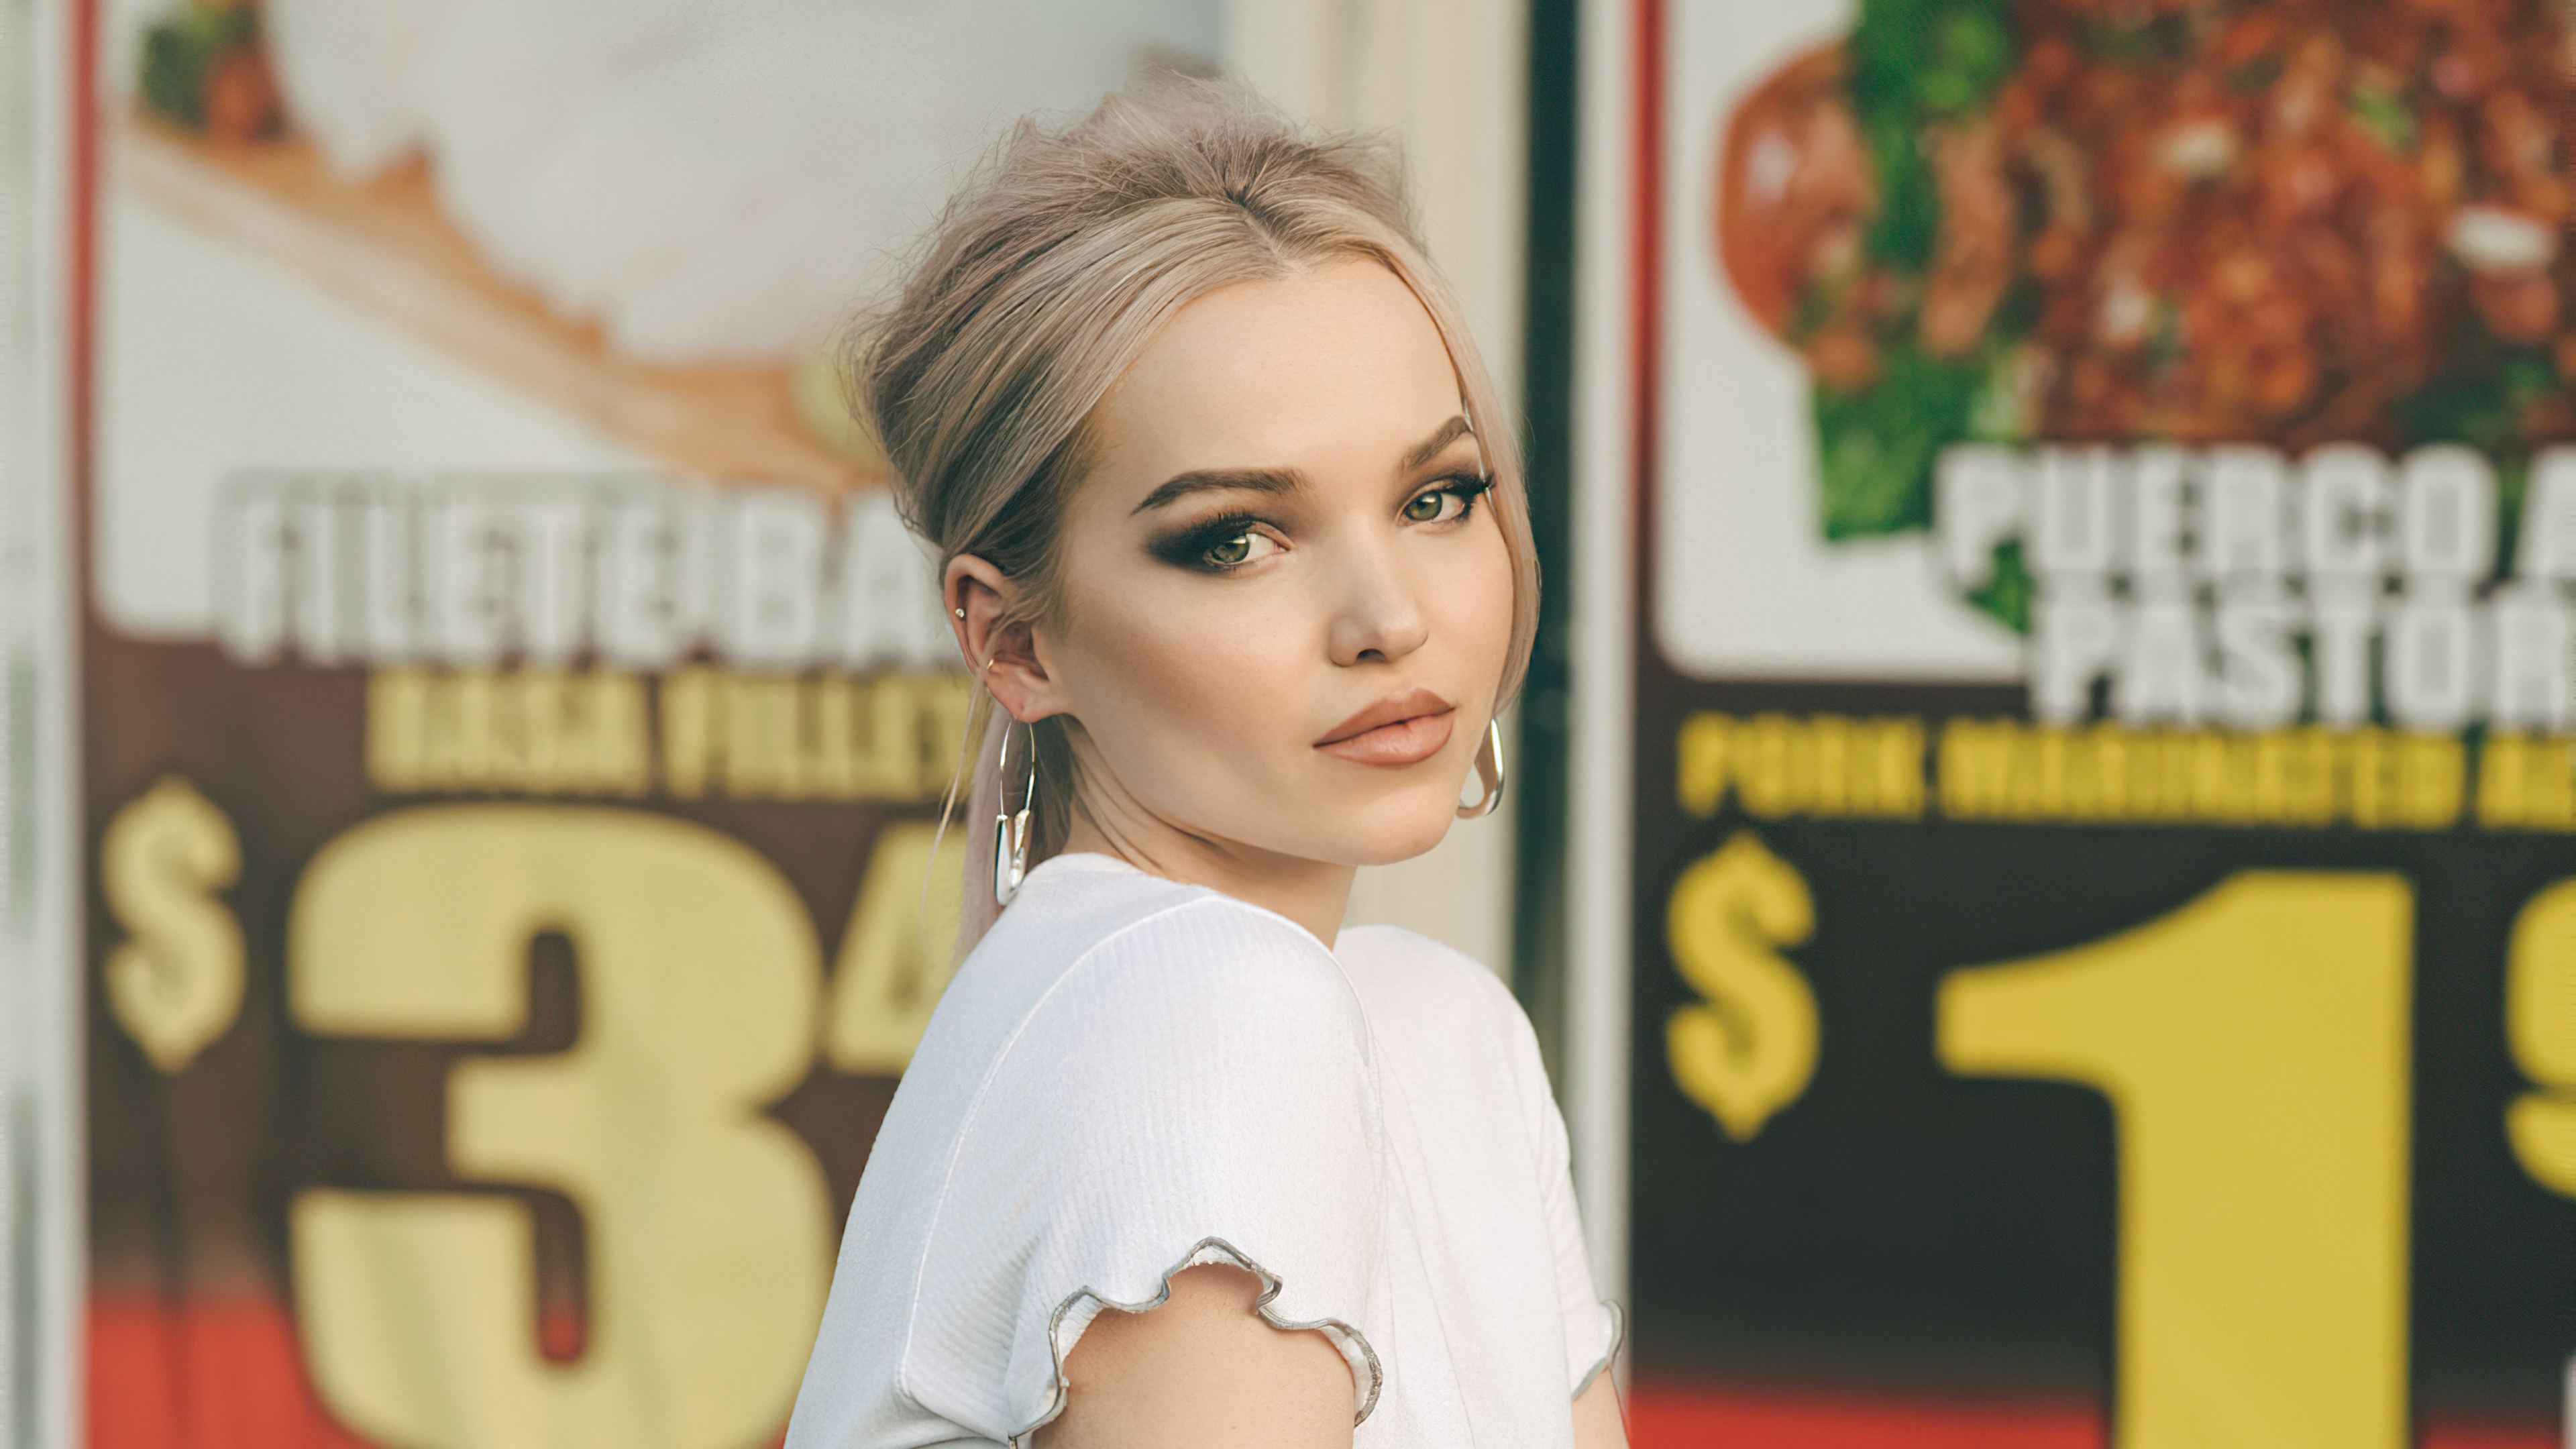 New Dove Cameron Wallpapers